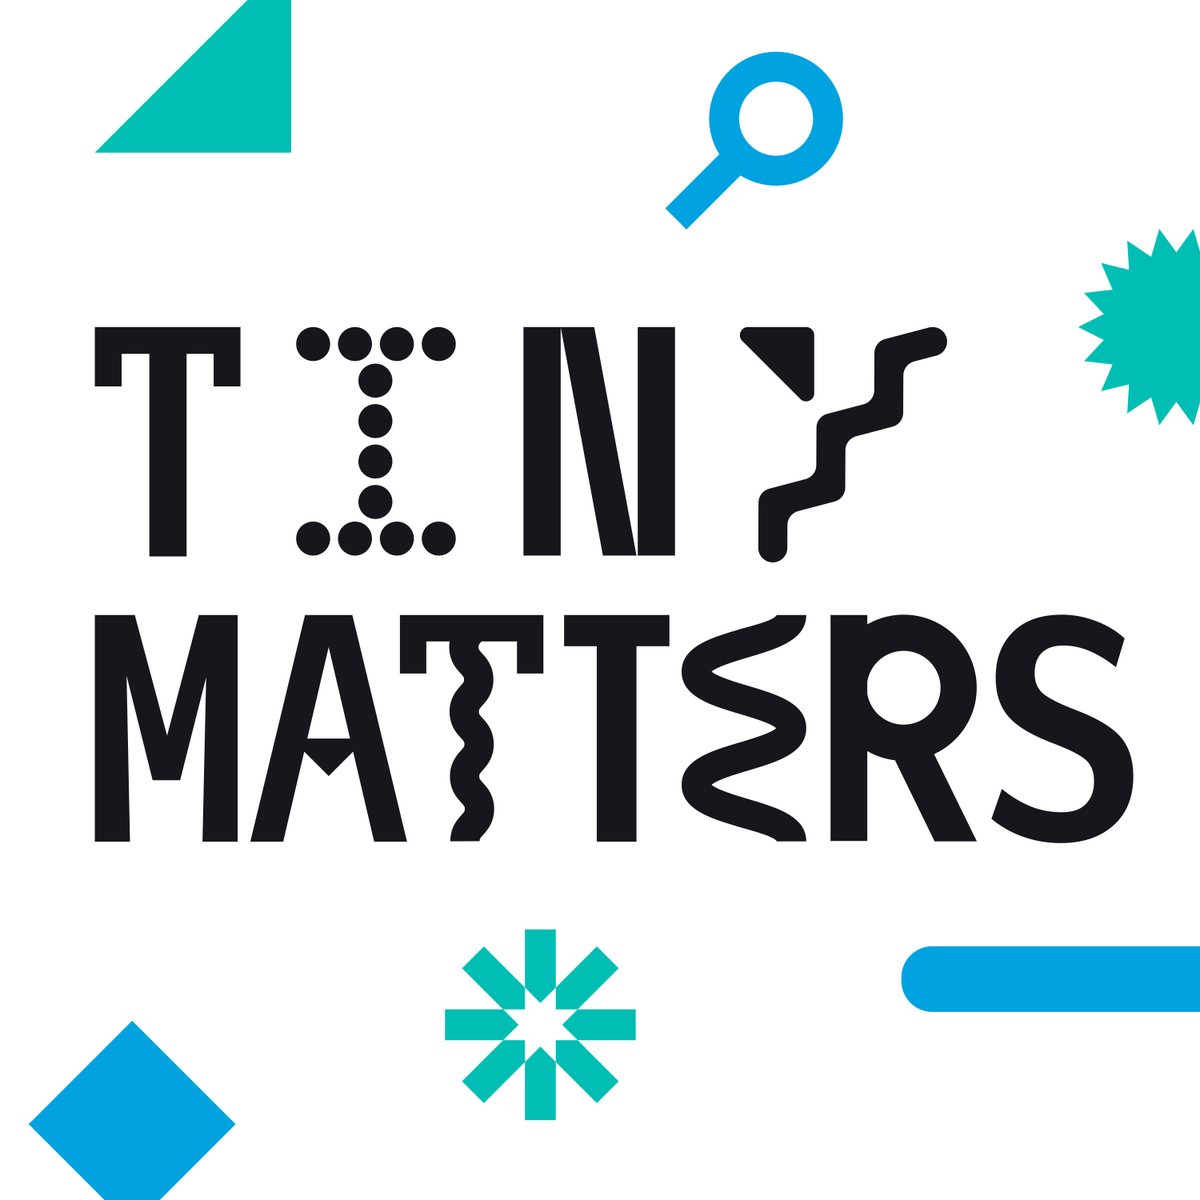 Looking for a #sciencepodcast to binge? Check out #TinyMatters, hosted by scientists turned science communicators @samjscience and @okidoki_boki, & now available on #YouTube. Check it out today at brnw.ch/21wGrHq.